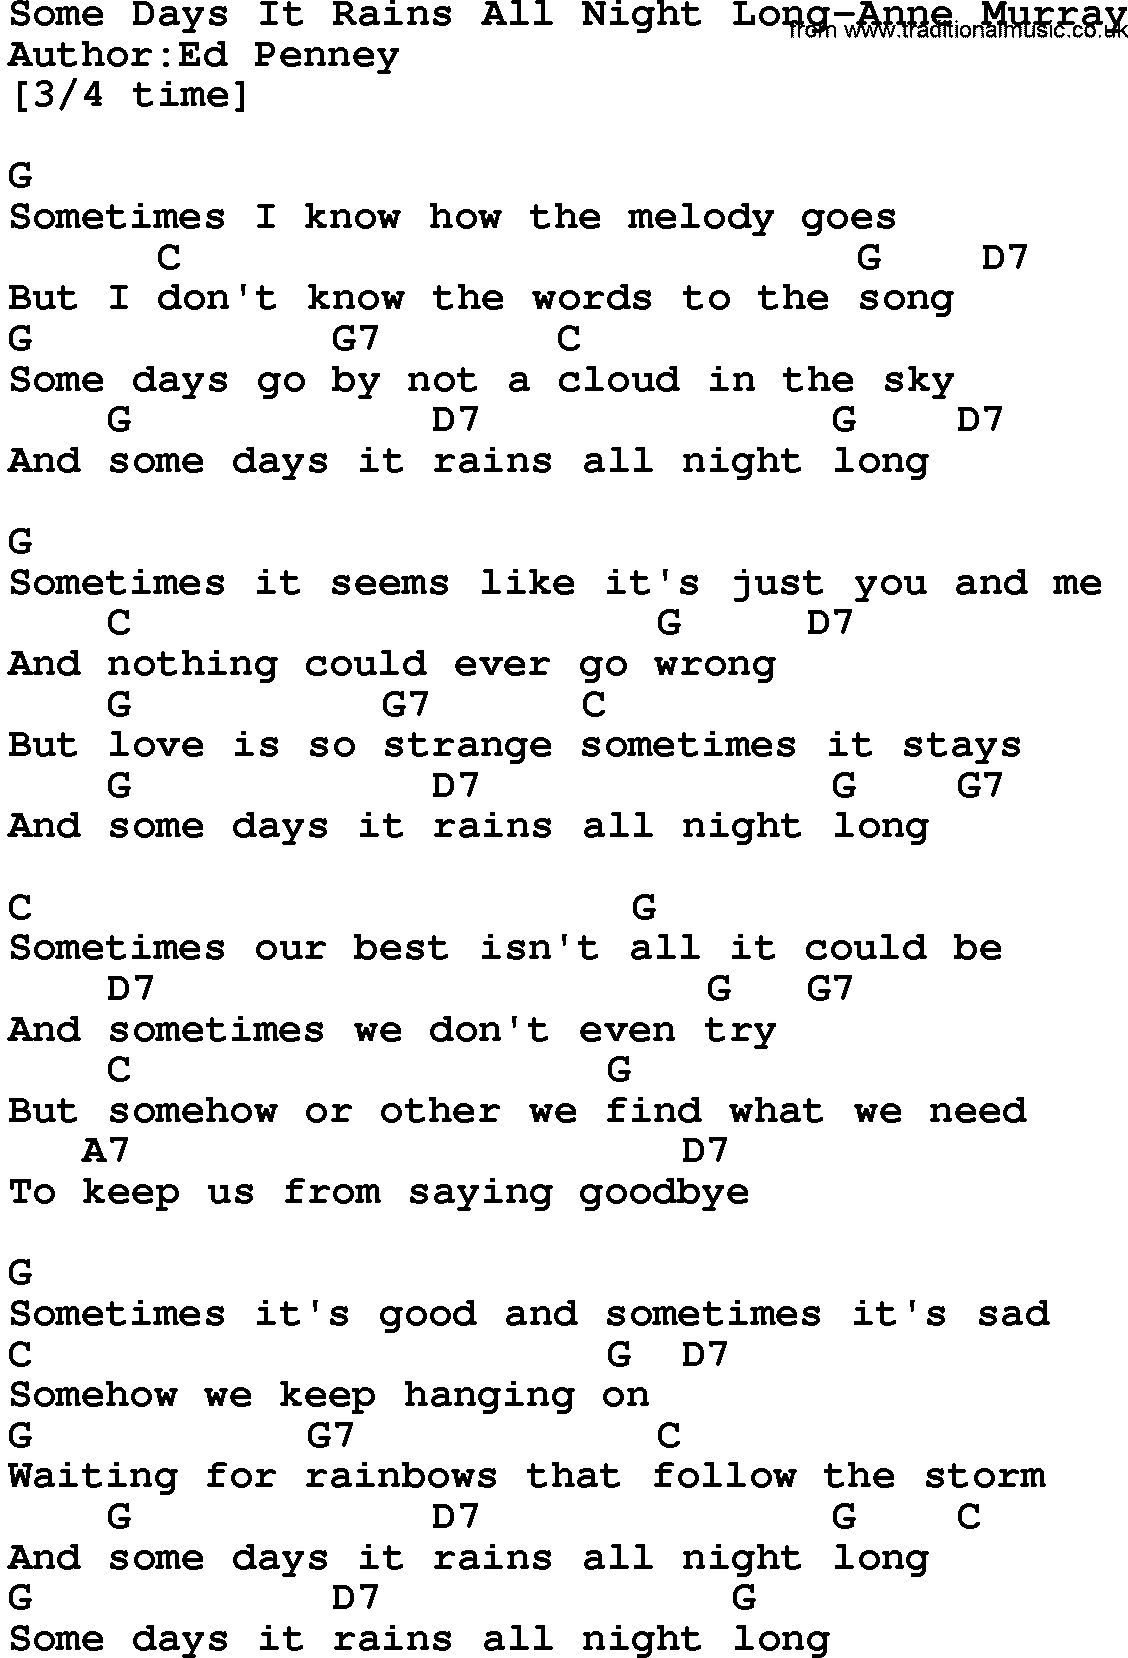 Country music song: Some Days It Rains All Night Long-Anne Murray lyrics and chords